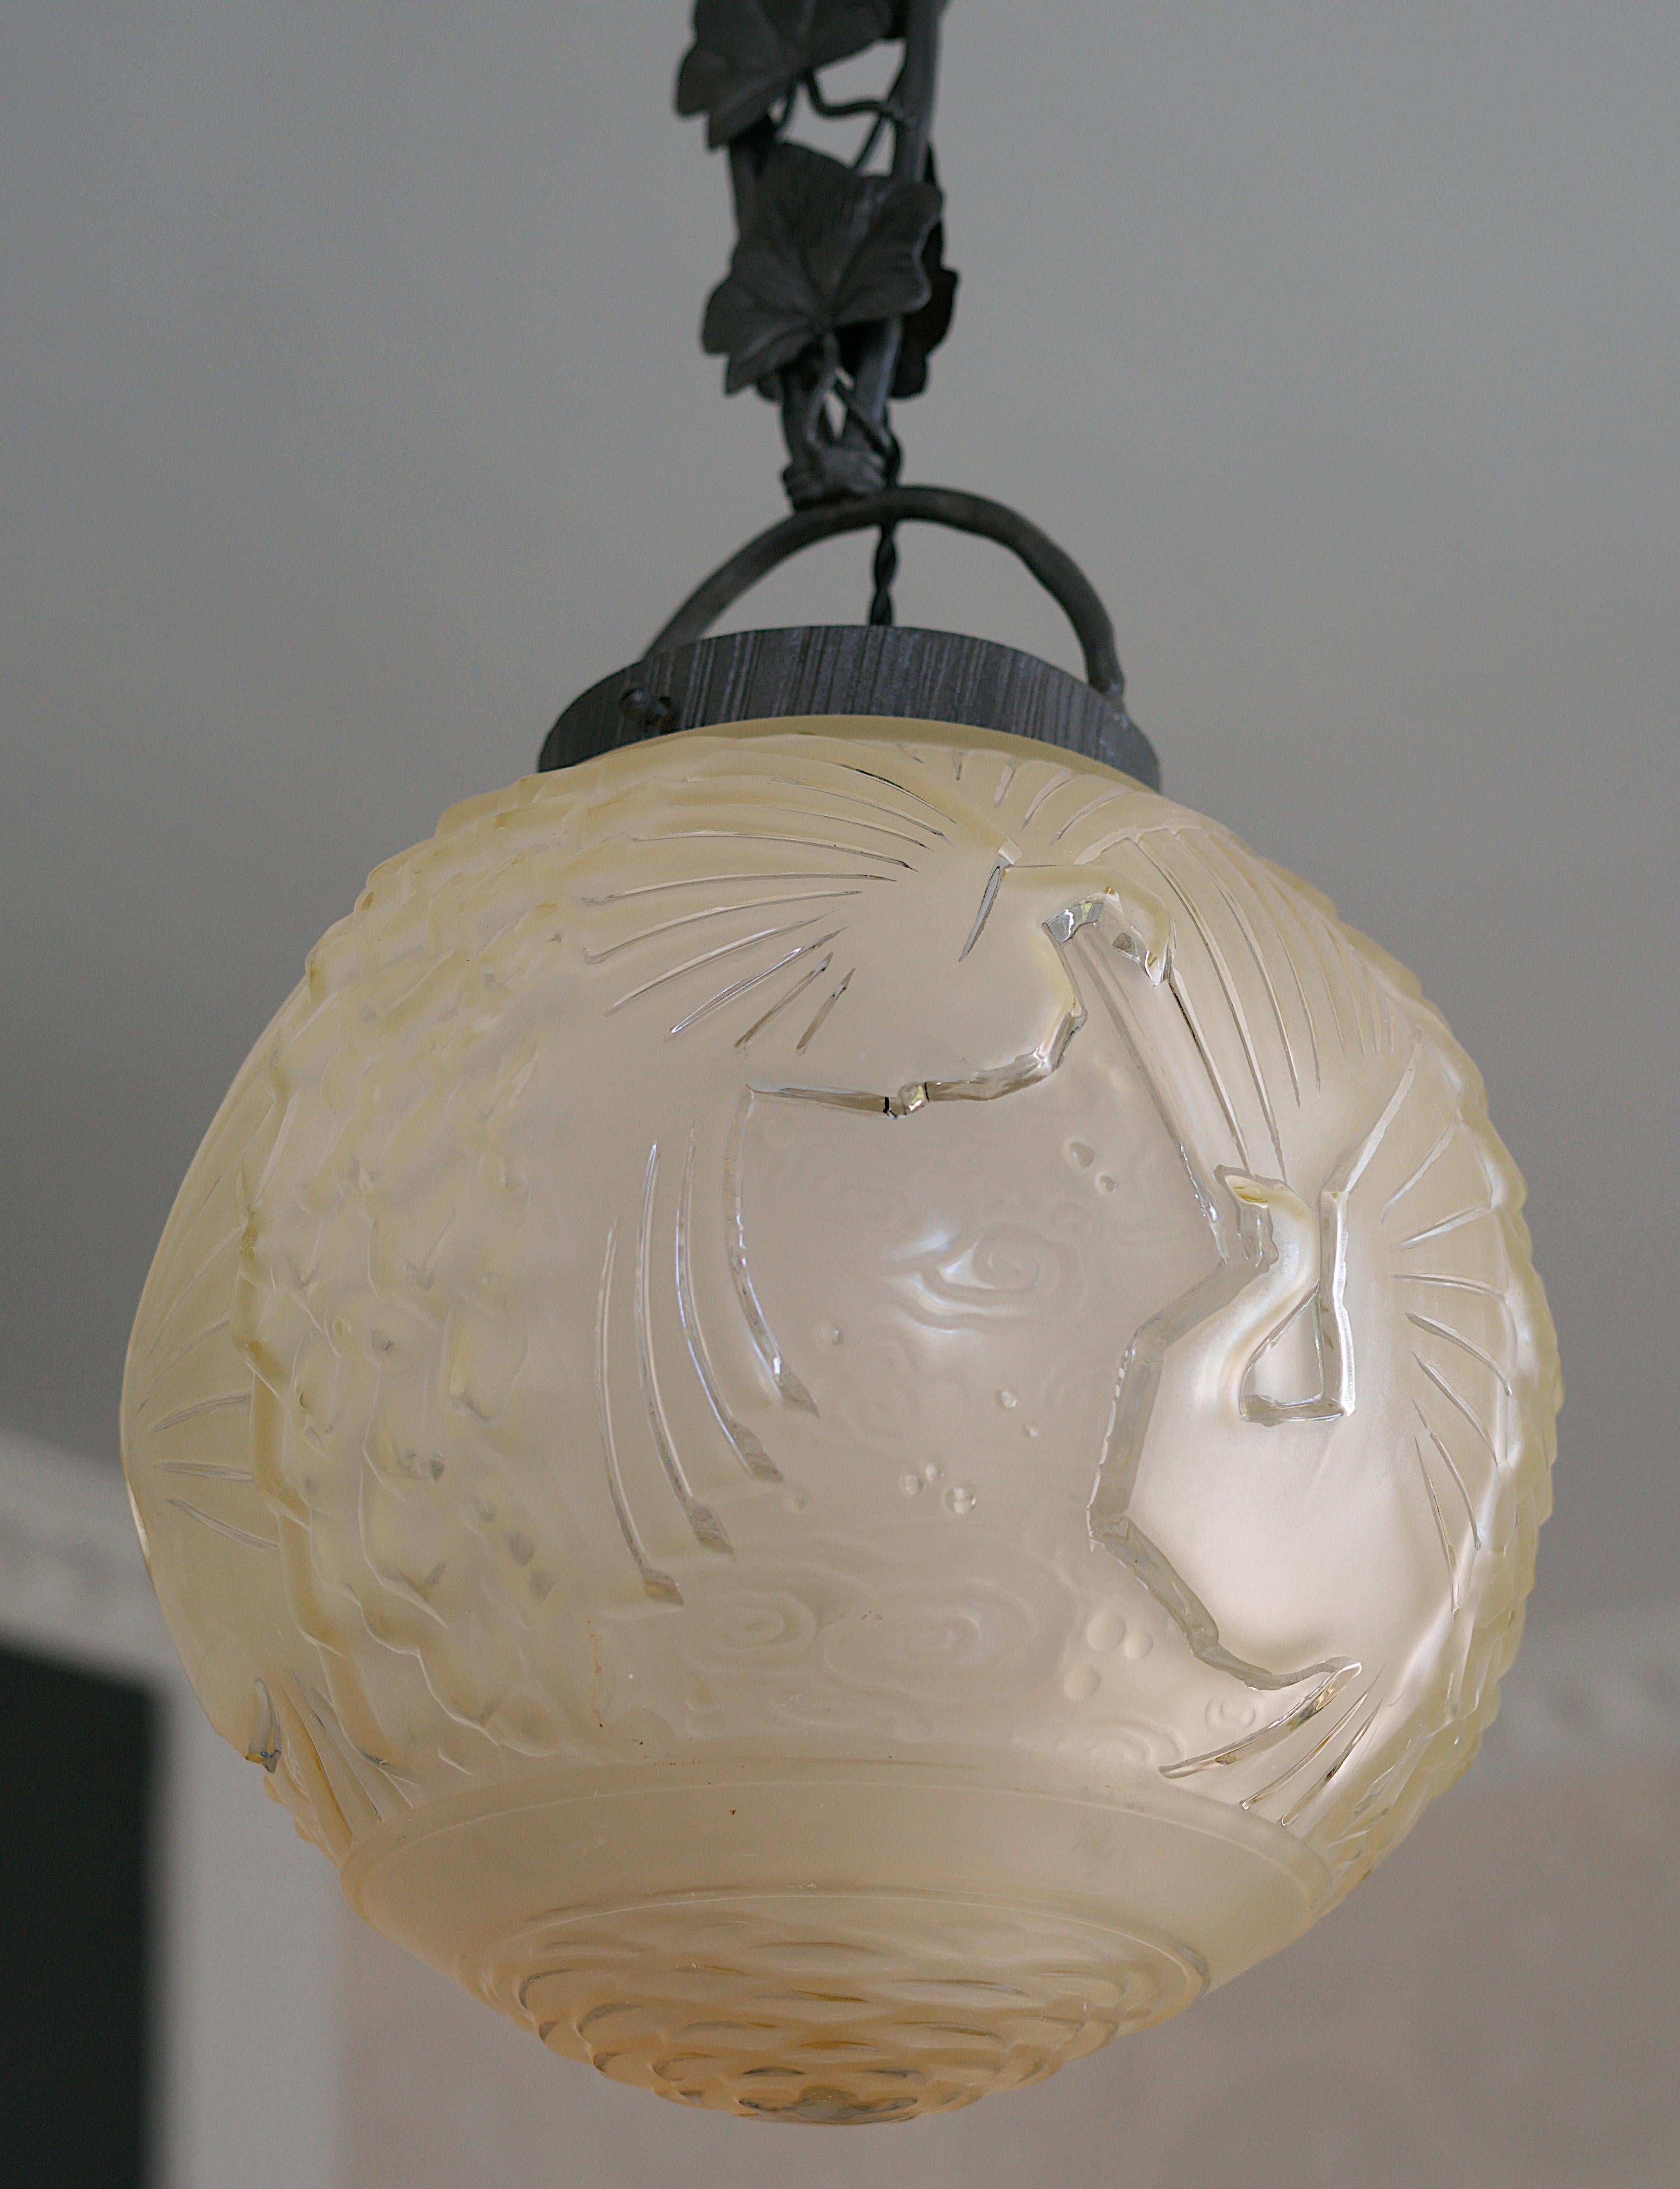 Muller Freres French Art Deco Bird Ceiling-Light, circa 1925 In Excellent Condition For Sale In Saint-Amans-des-Cots, FR